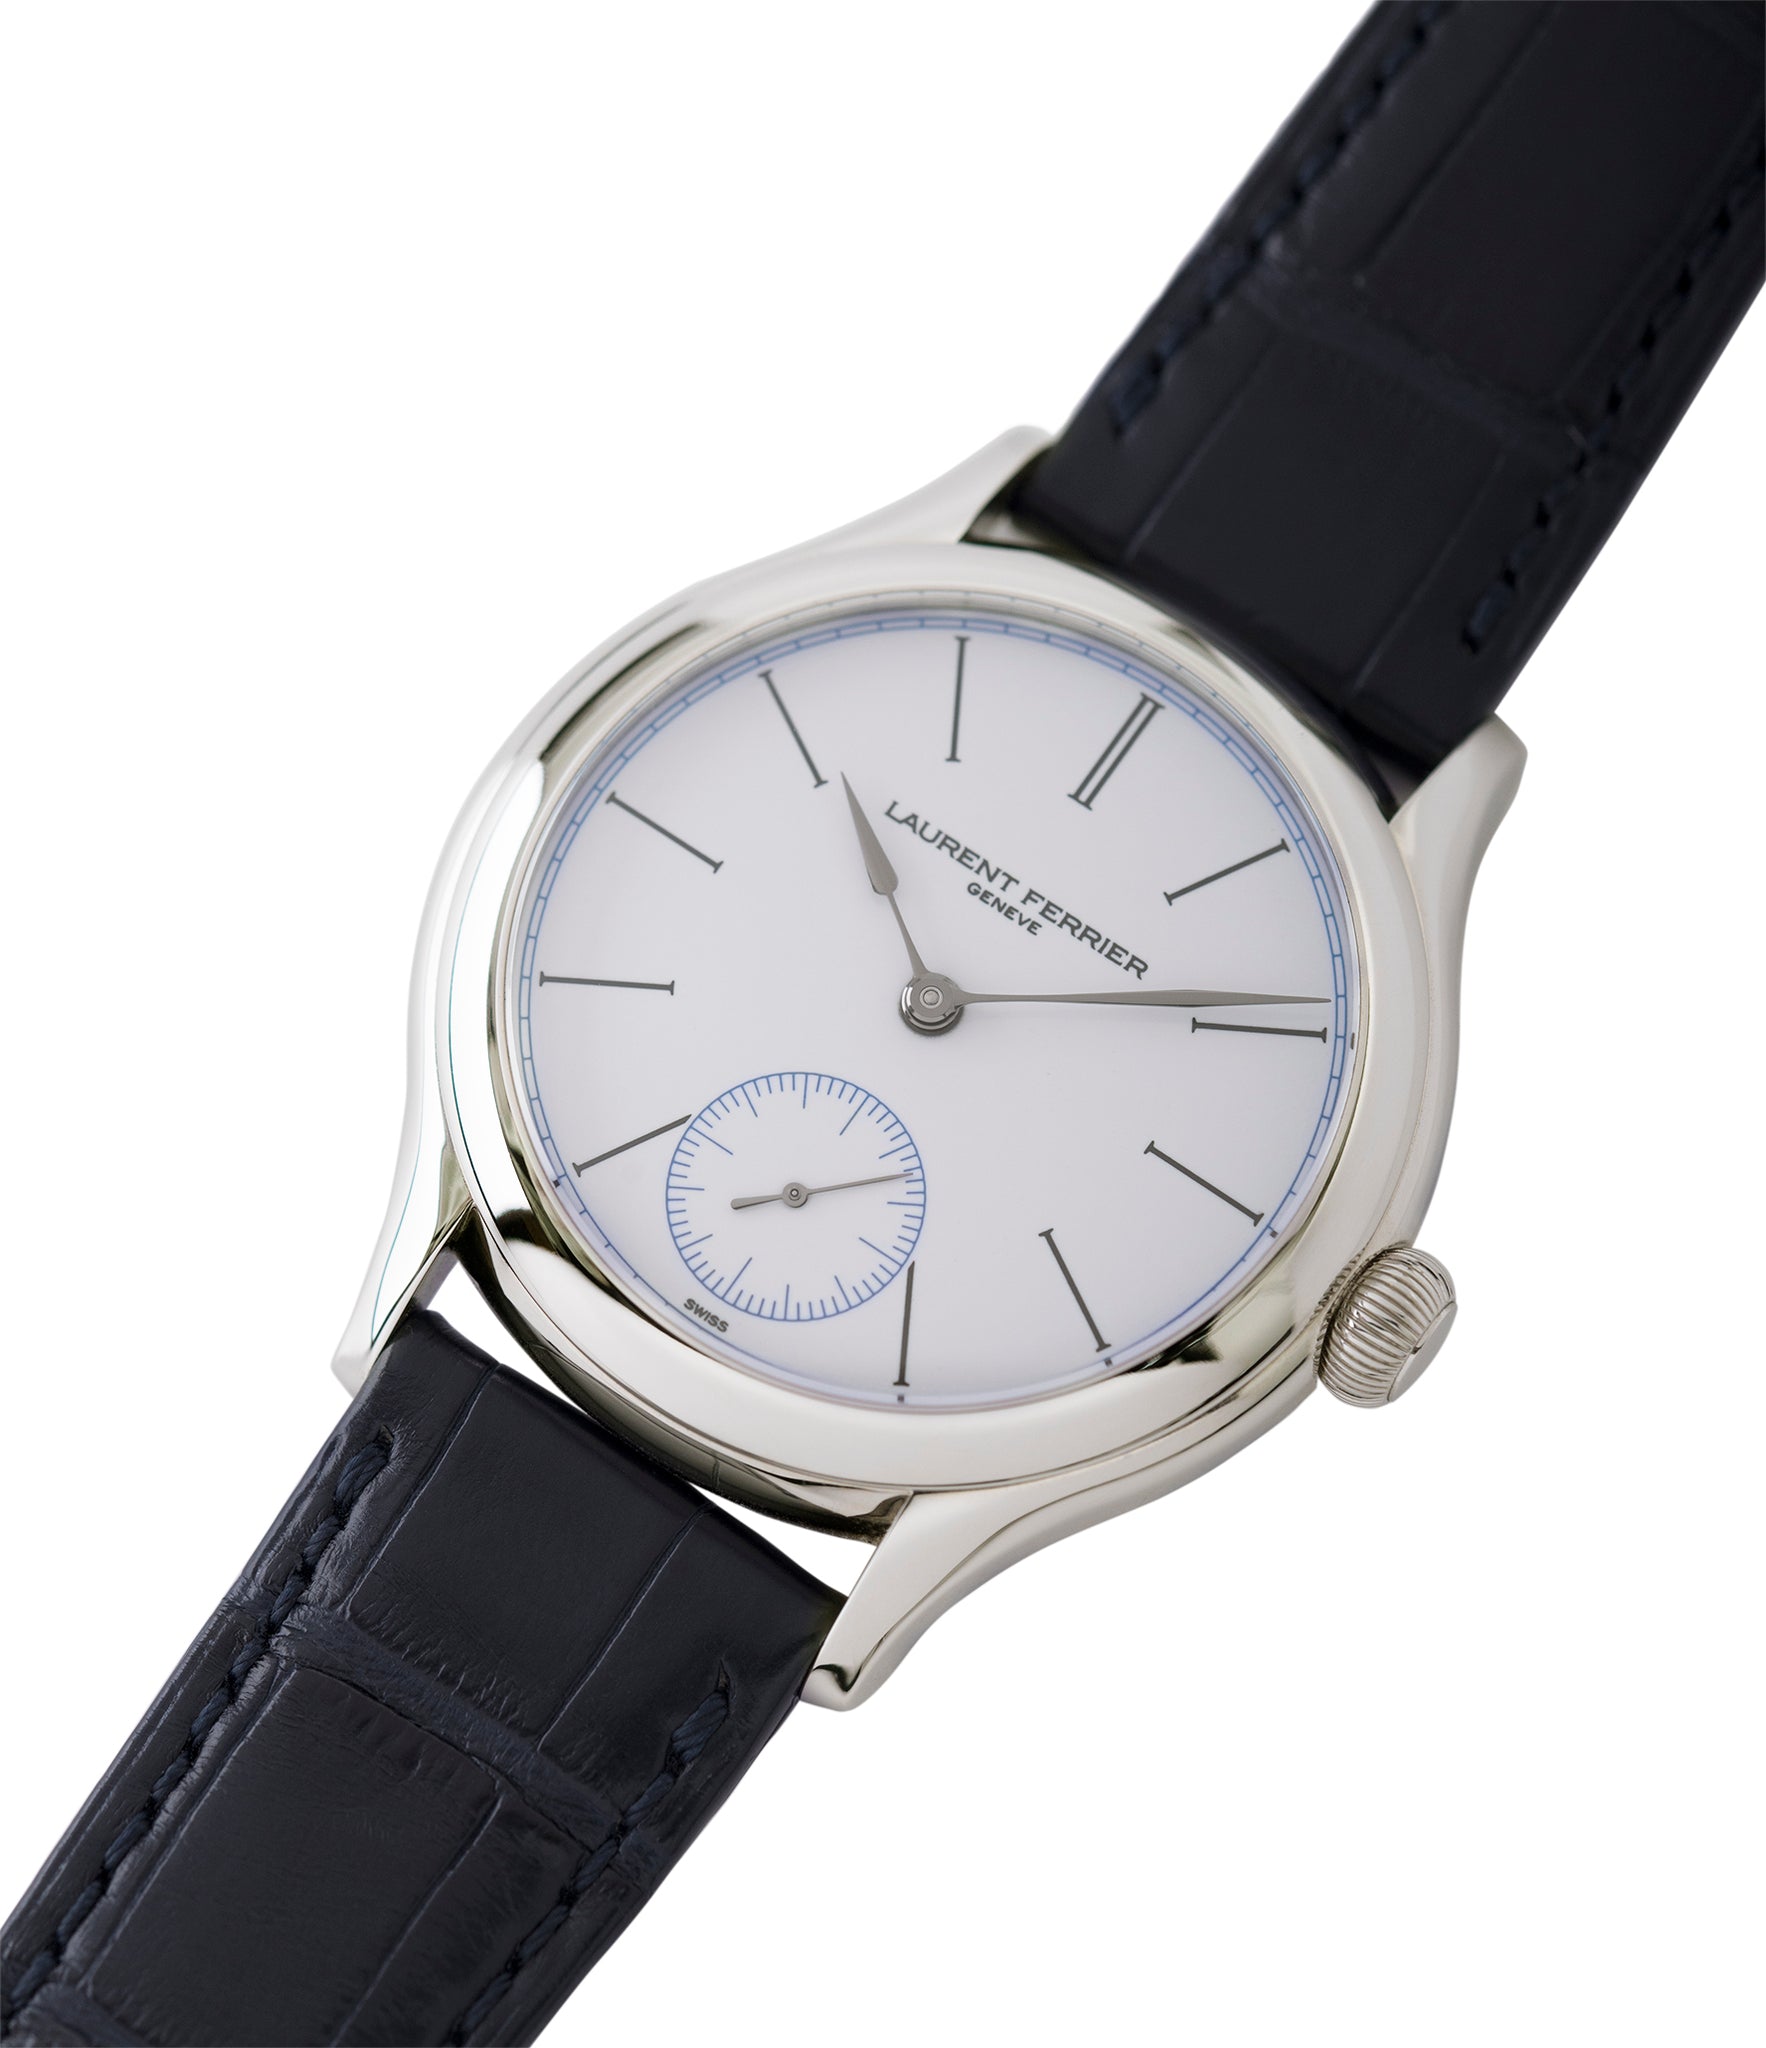 buy preowned Laurent Ferrier Galet Micro-Rotor FBN 230.02 Enamel dial steel watch for sale online at A Collected Man London UK approved seller of independent watchmaker Laurent Ferrier